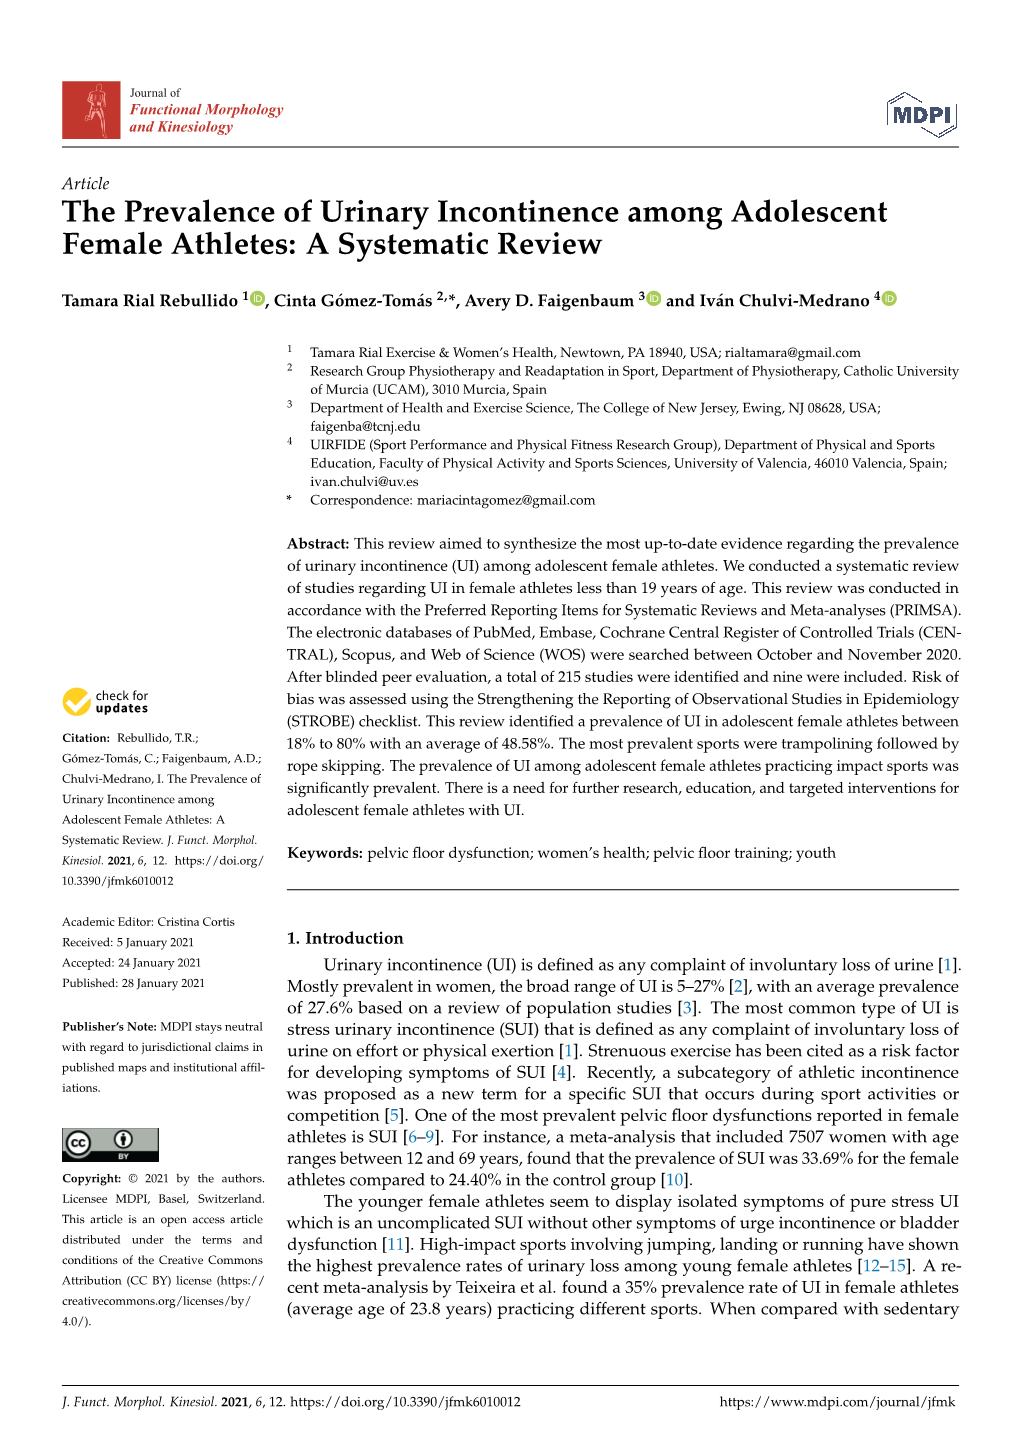 The Prevalence of Urinary Incontinence Among Adolescent Female Athletes: a Systematic Review